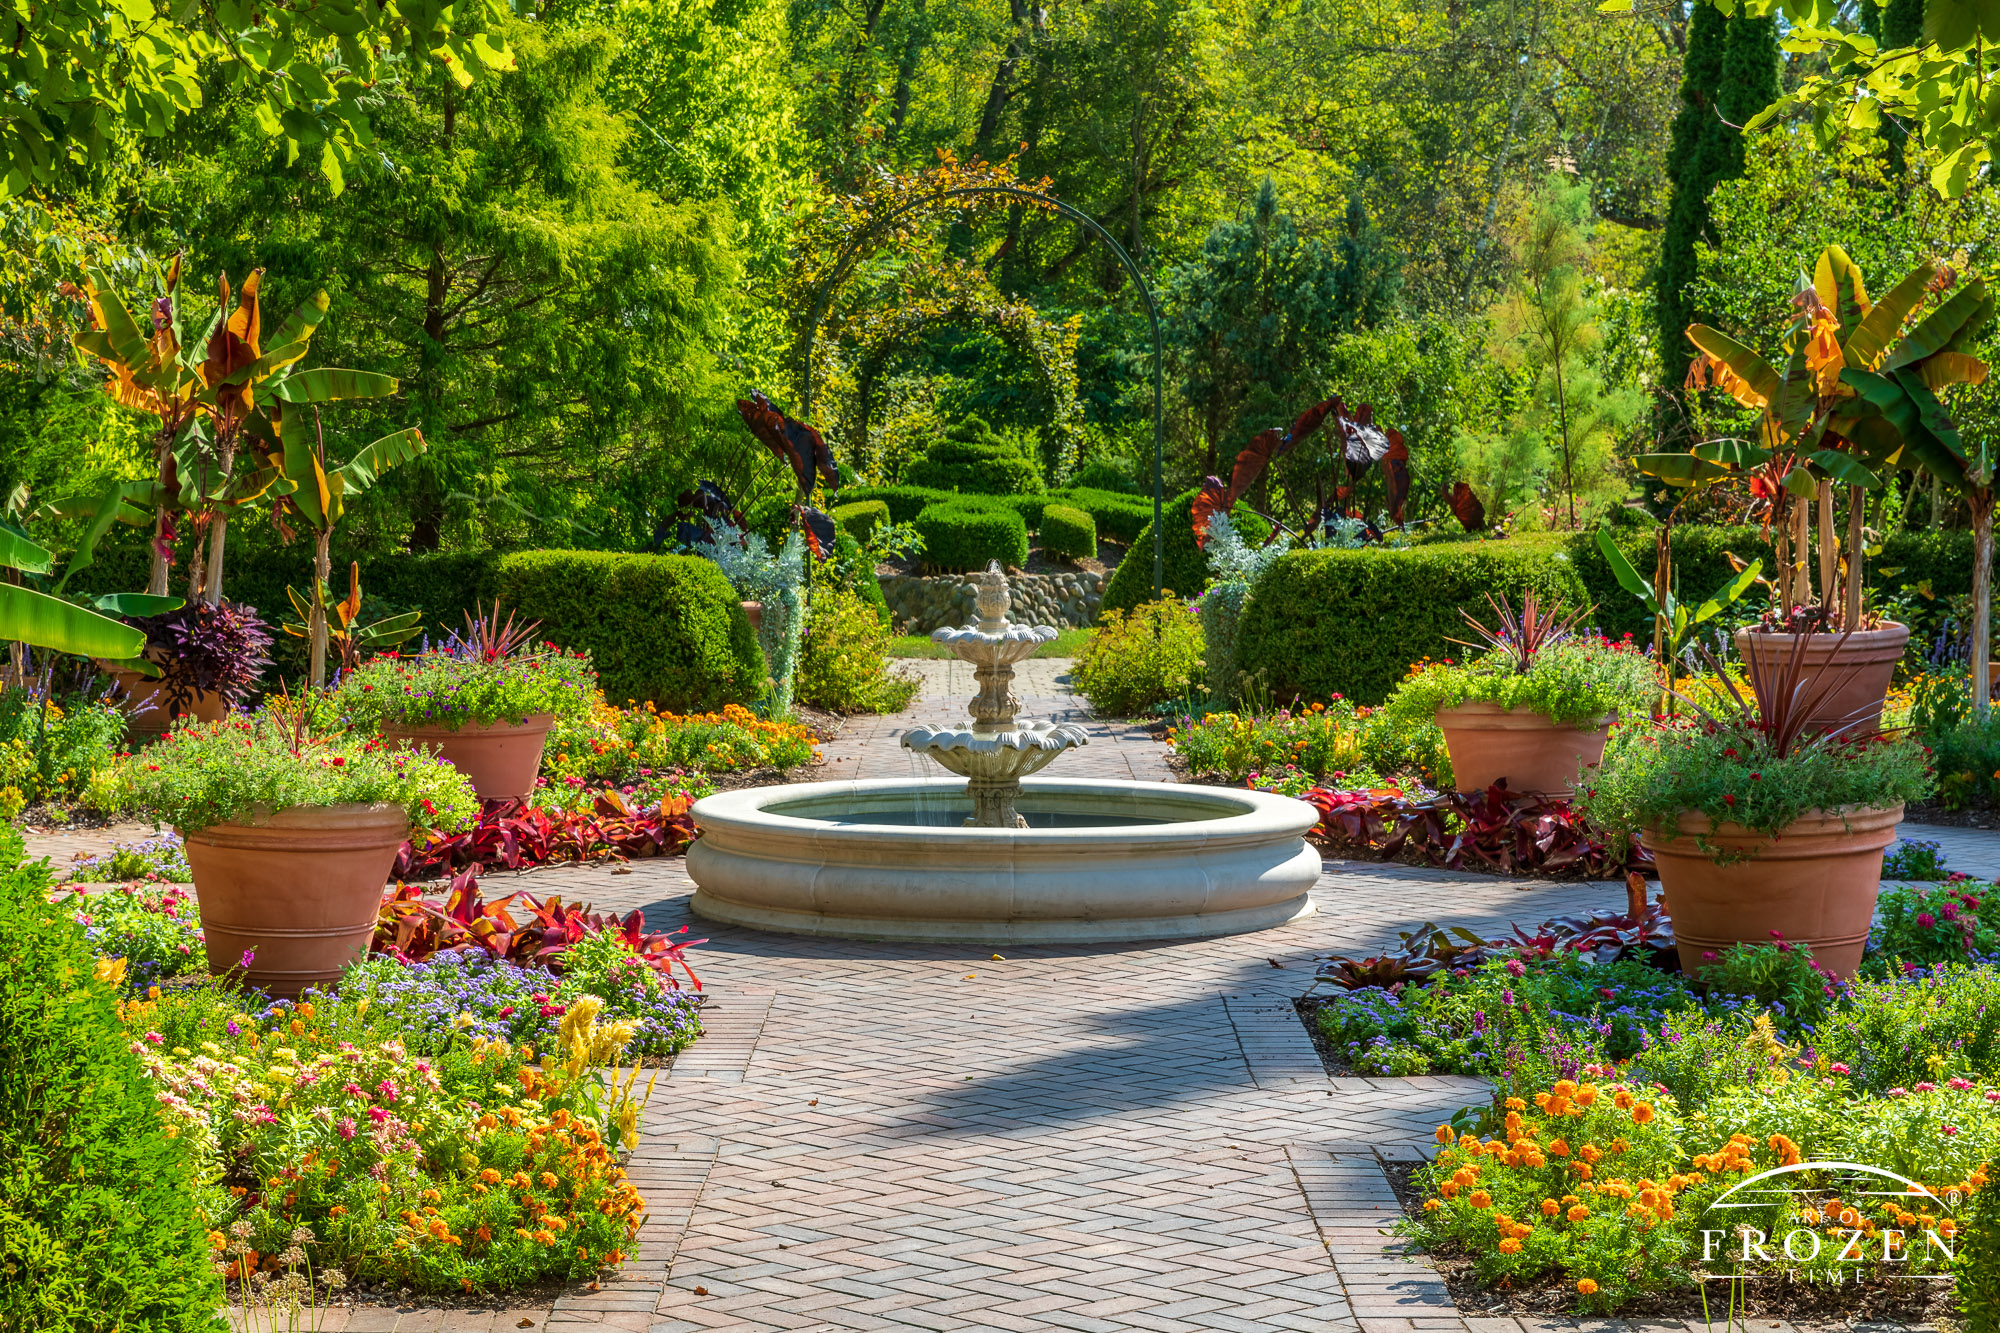 A formal English garden featuring a trickling fountain surrounded by lush and vibrant flowerbeds, pots and topiaries in the evening light.